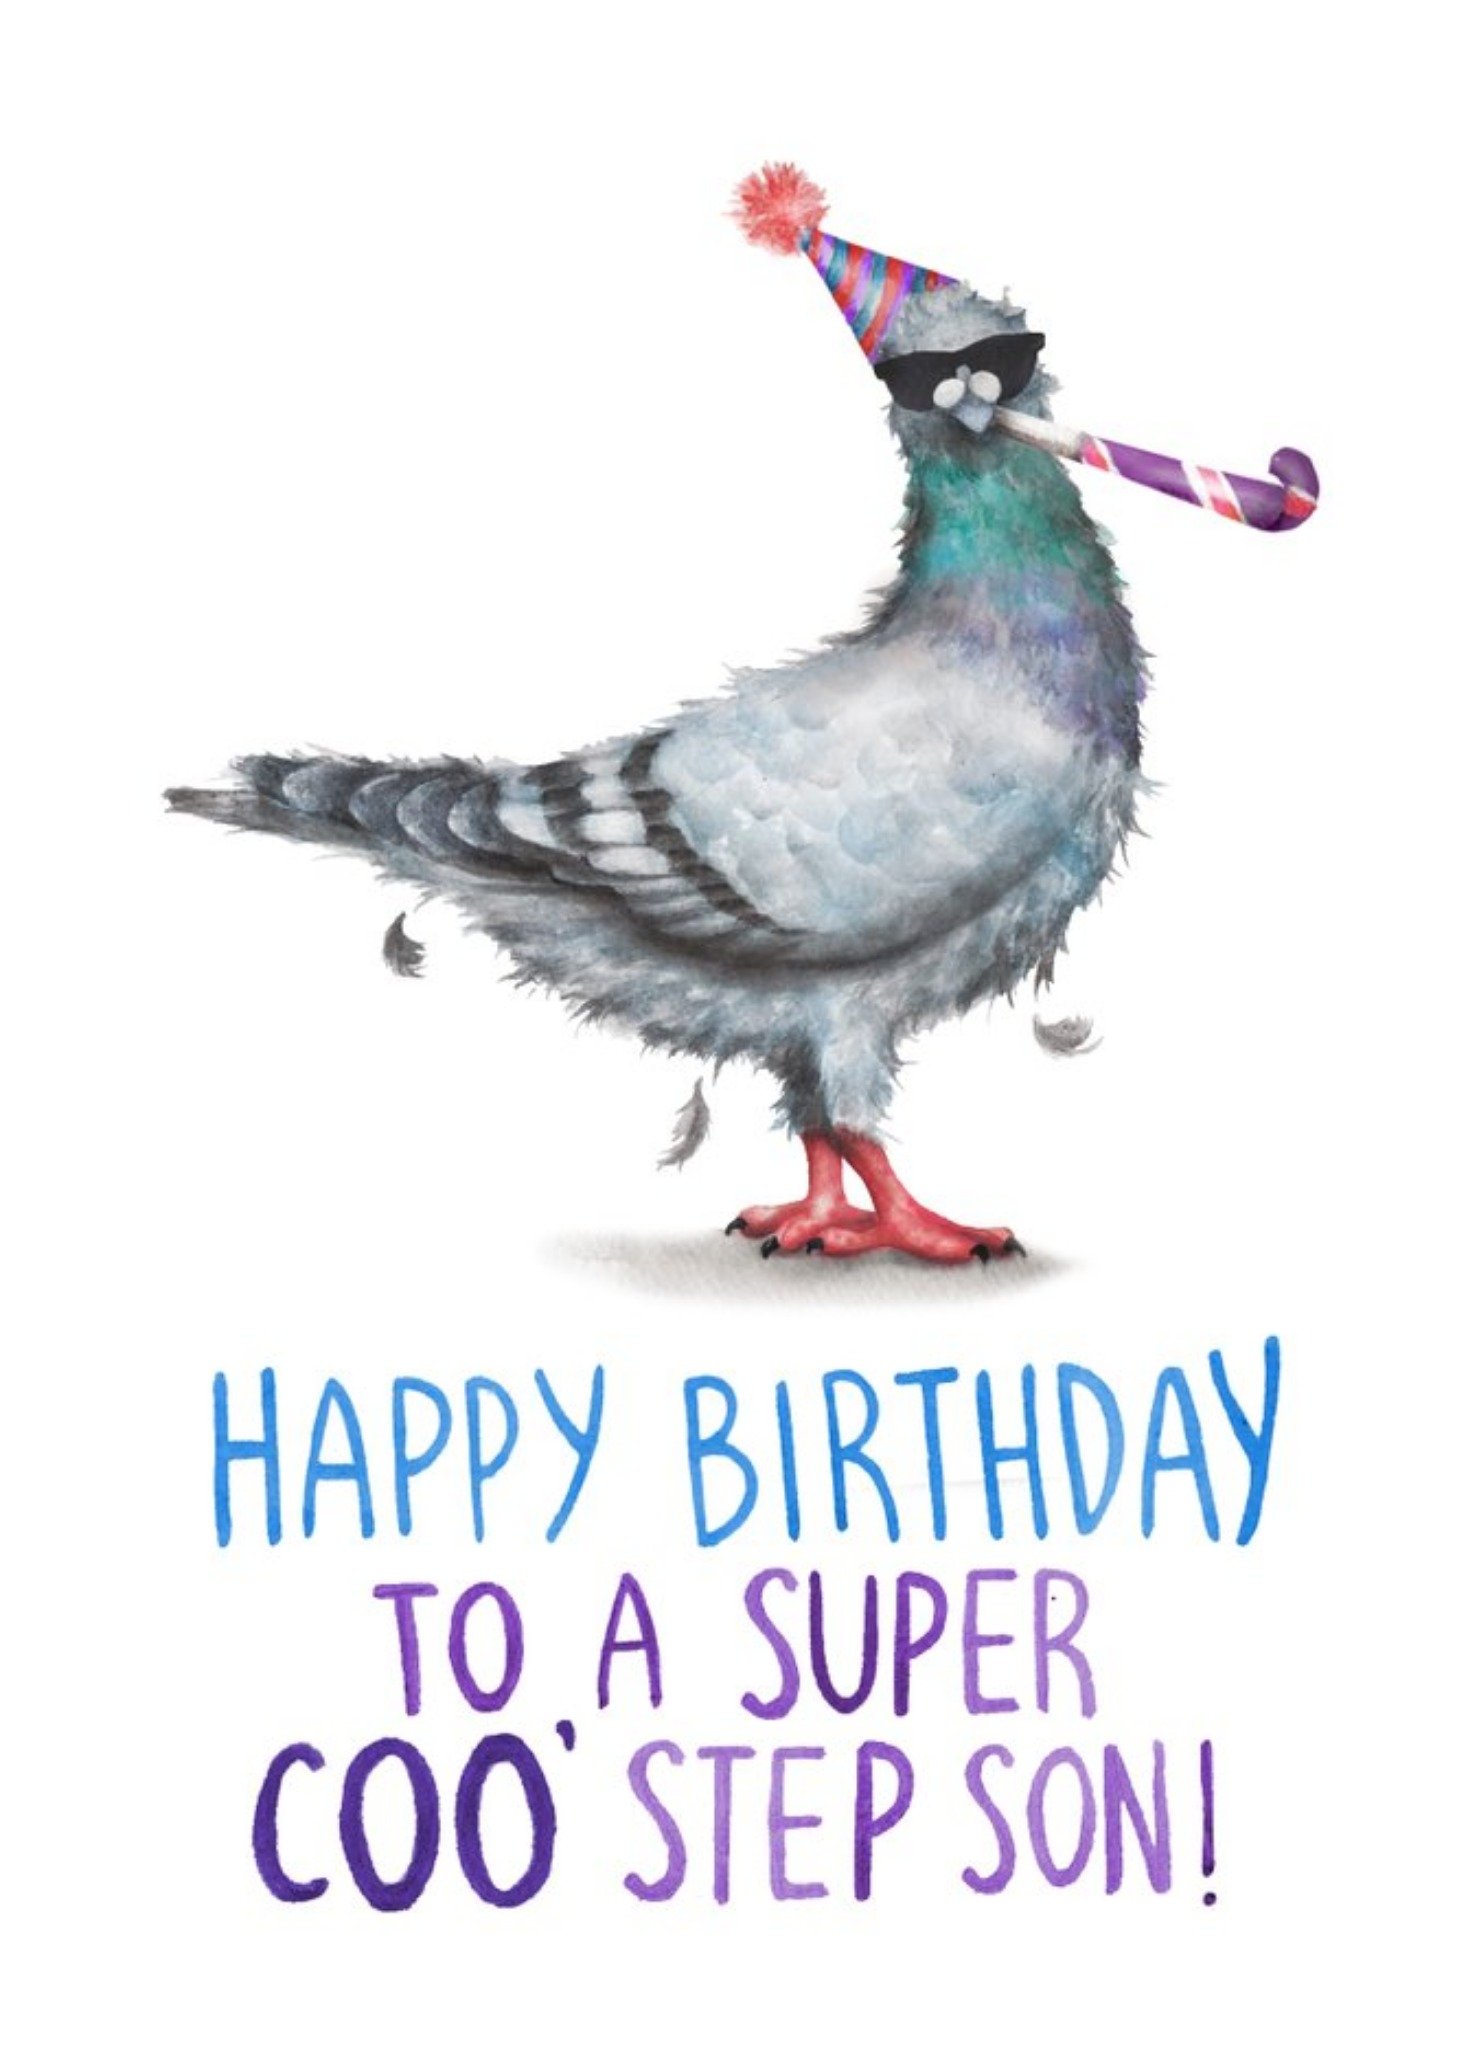 Moonpig Cute Pigeon To A Super Coo' Step Son Birthday Card, Large